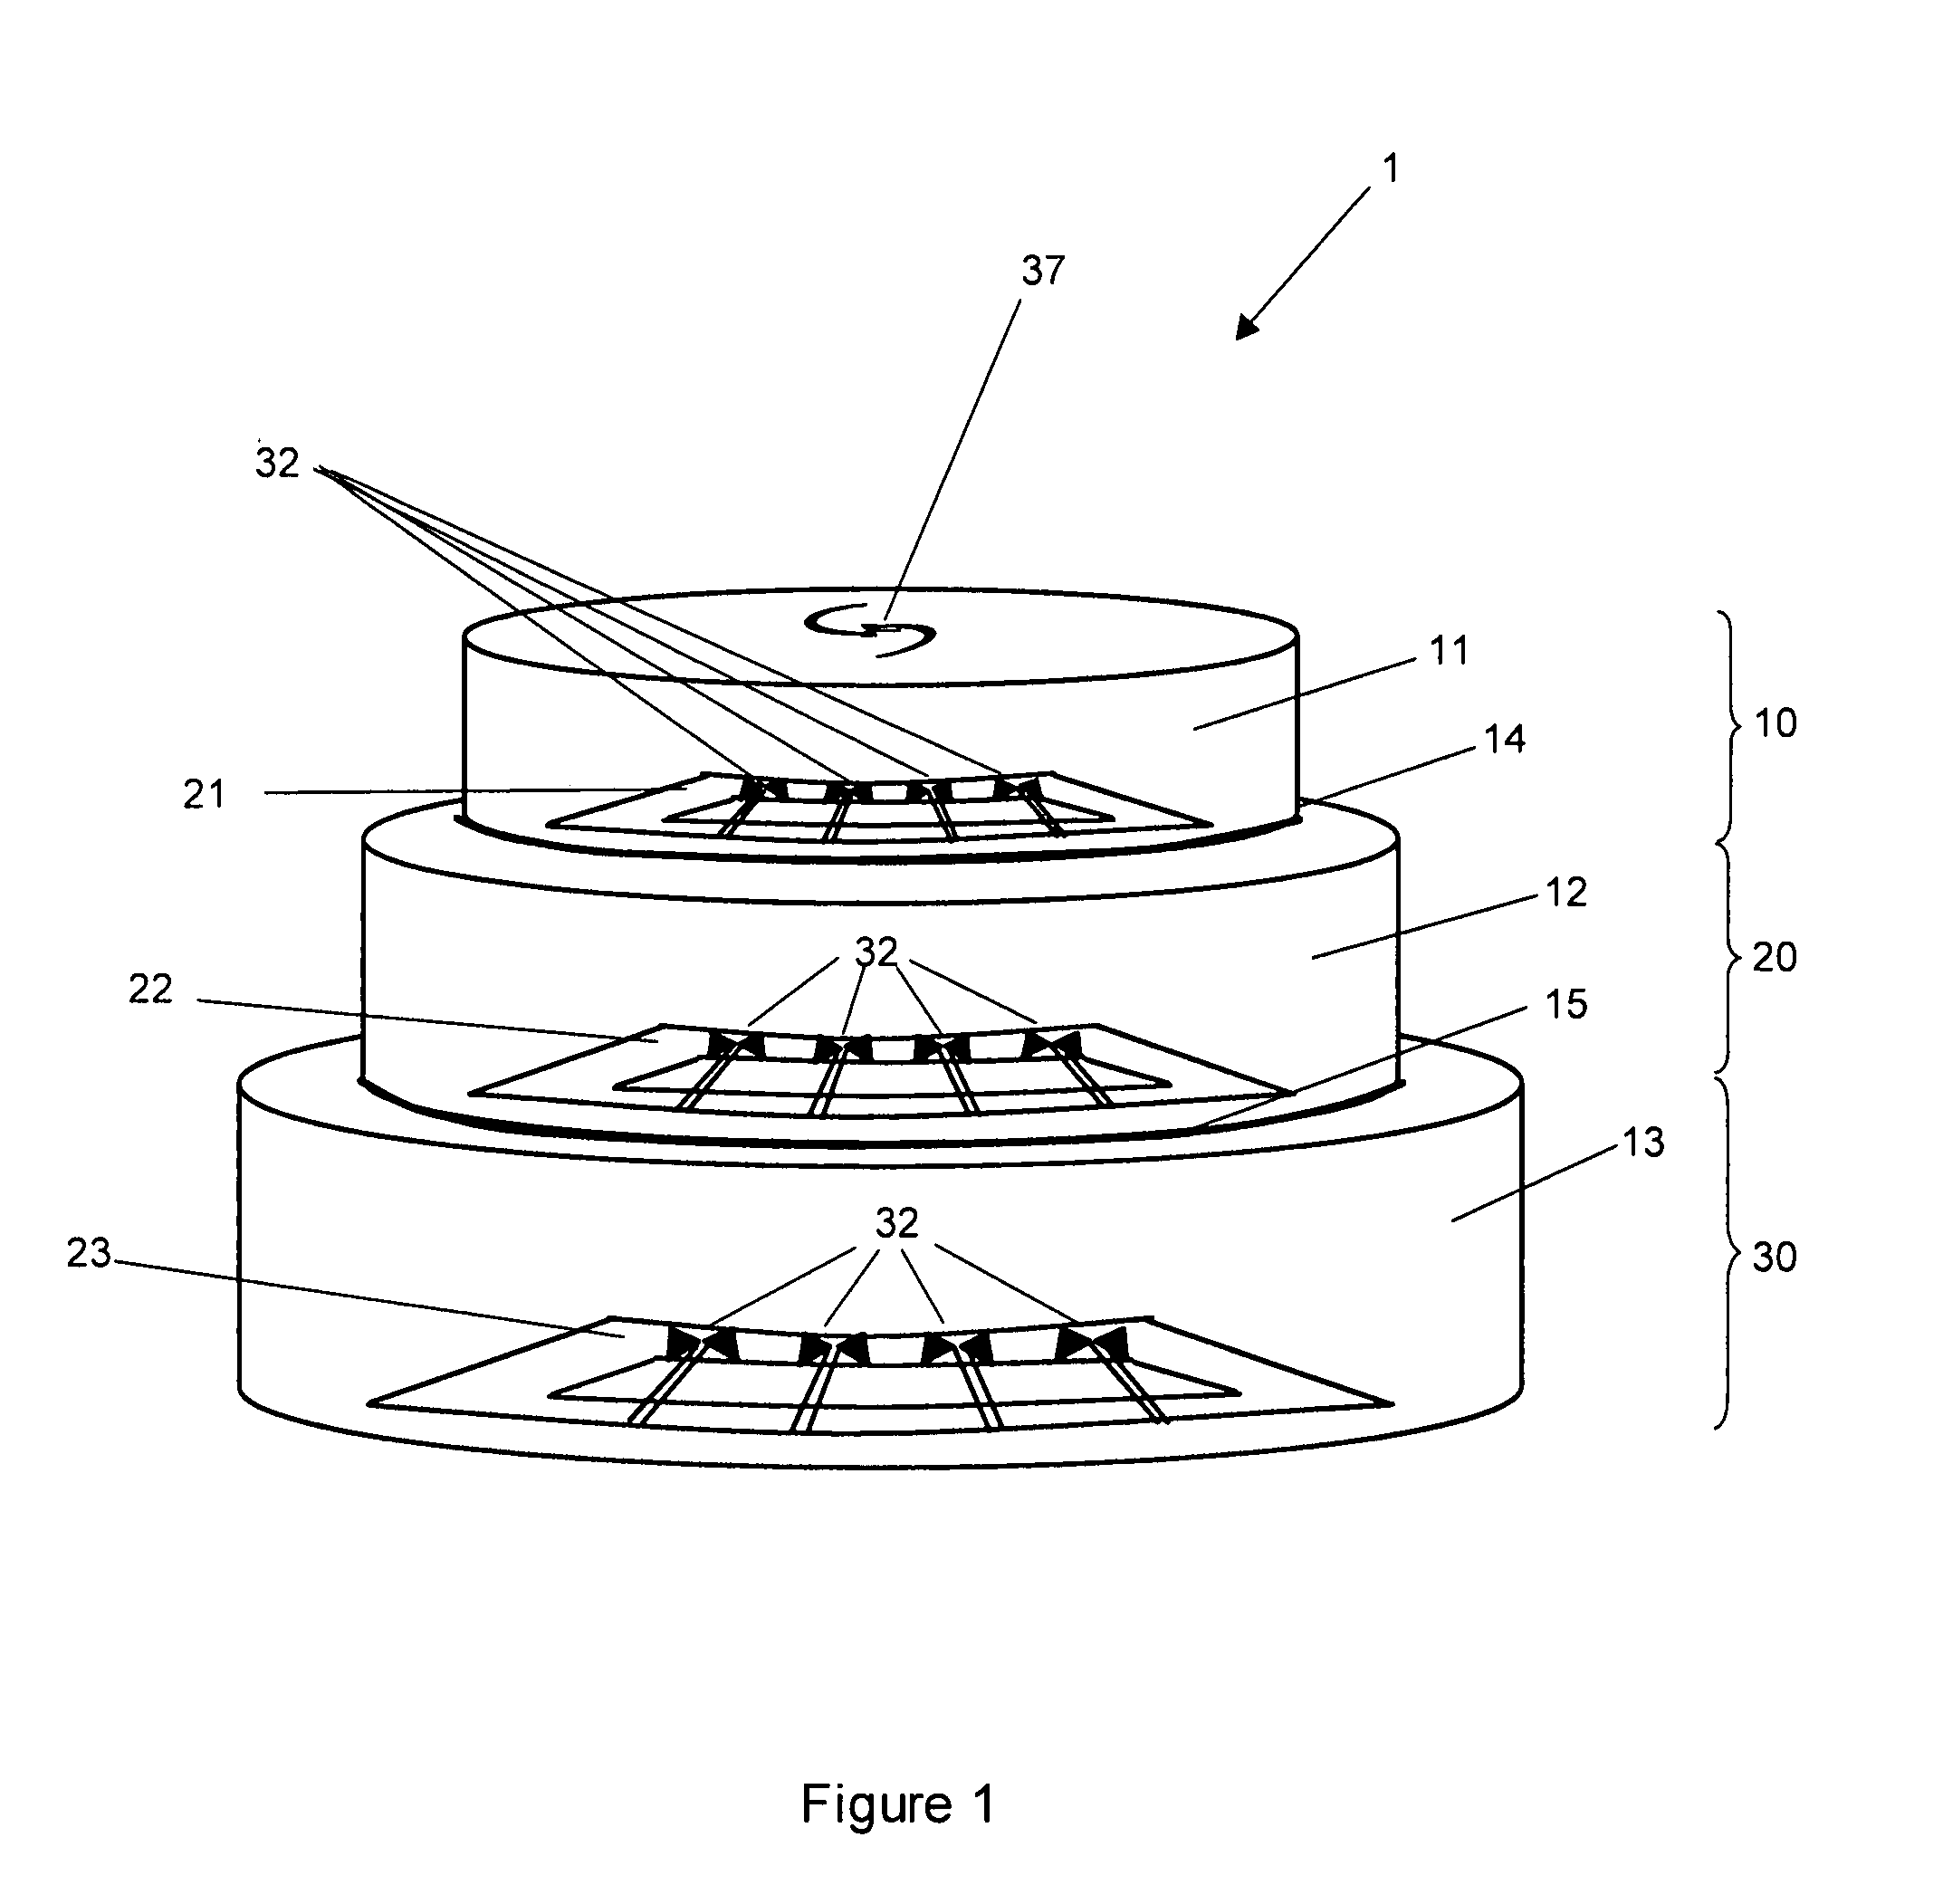 Antenna operable across multiple frequencies while maintaining substantially uniform beam shape